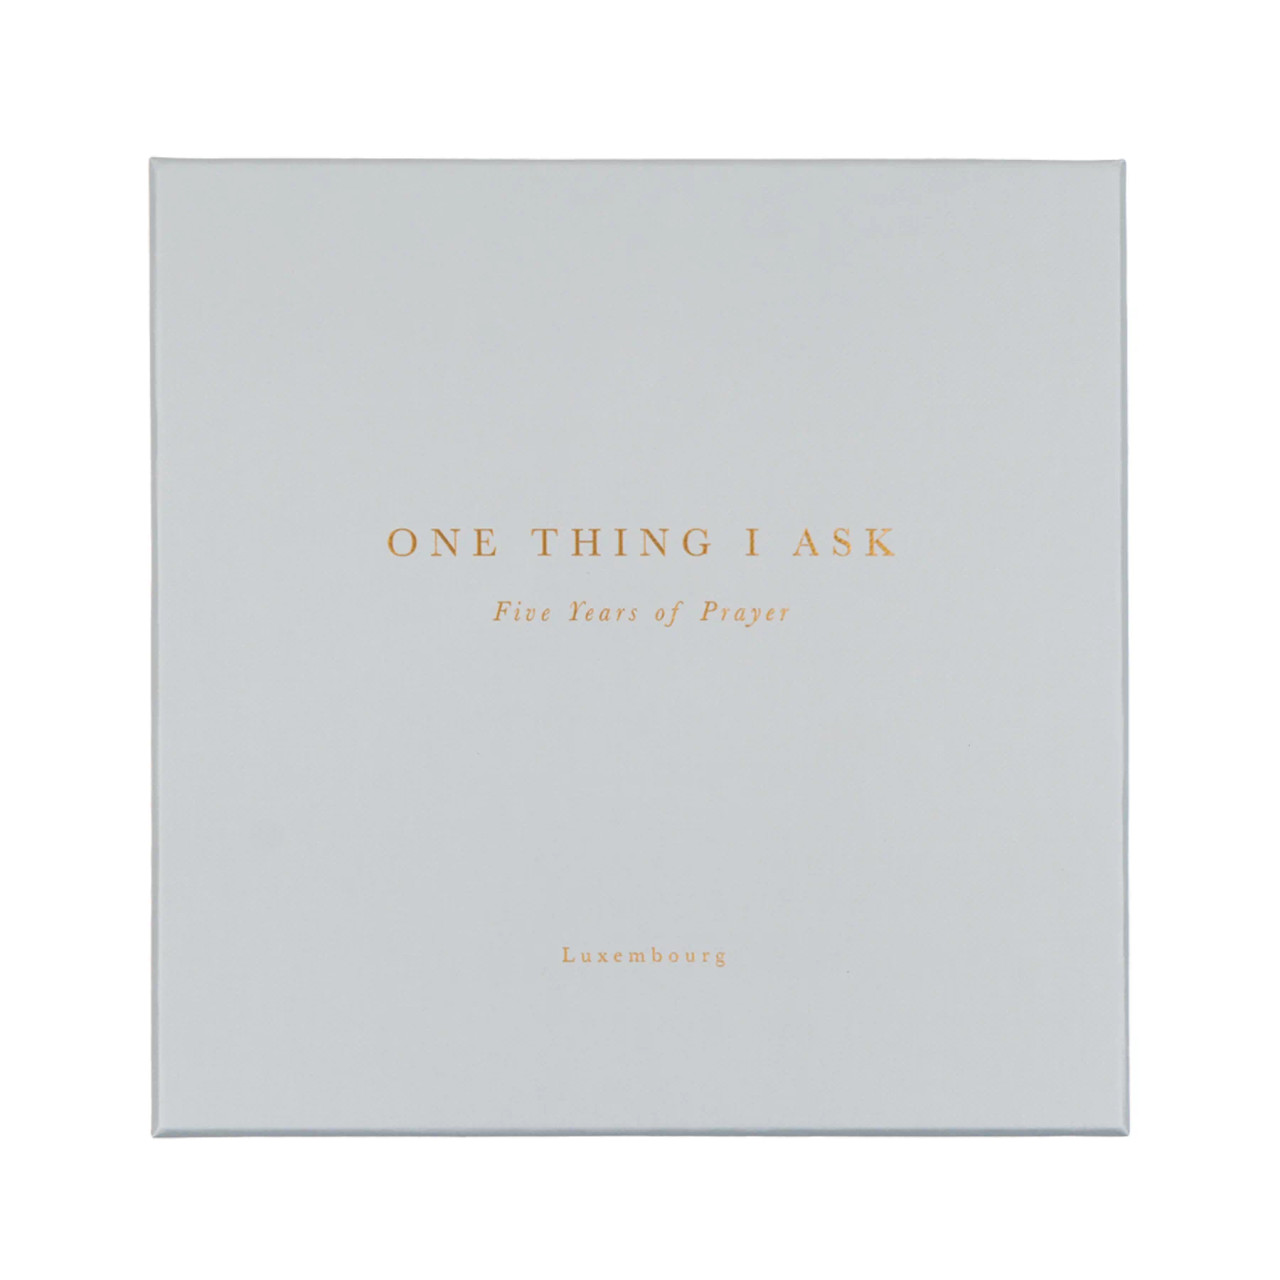 One Thing I Ask: 5-Year Prayer Journal - Genuine Leather - Hosanna Revival - Luxembourg Theme